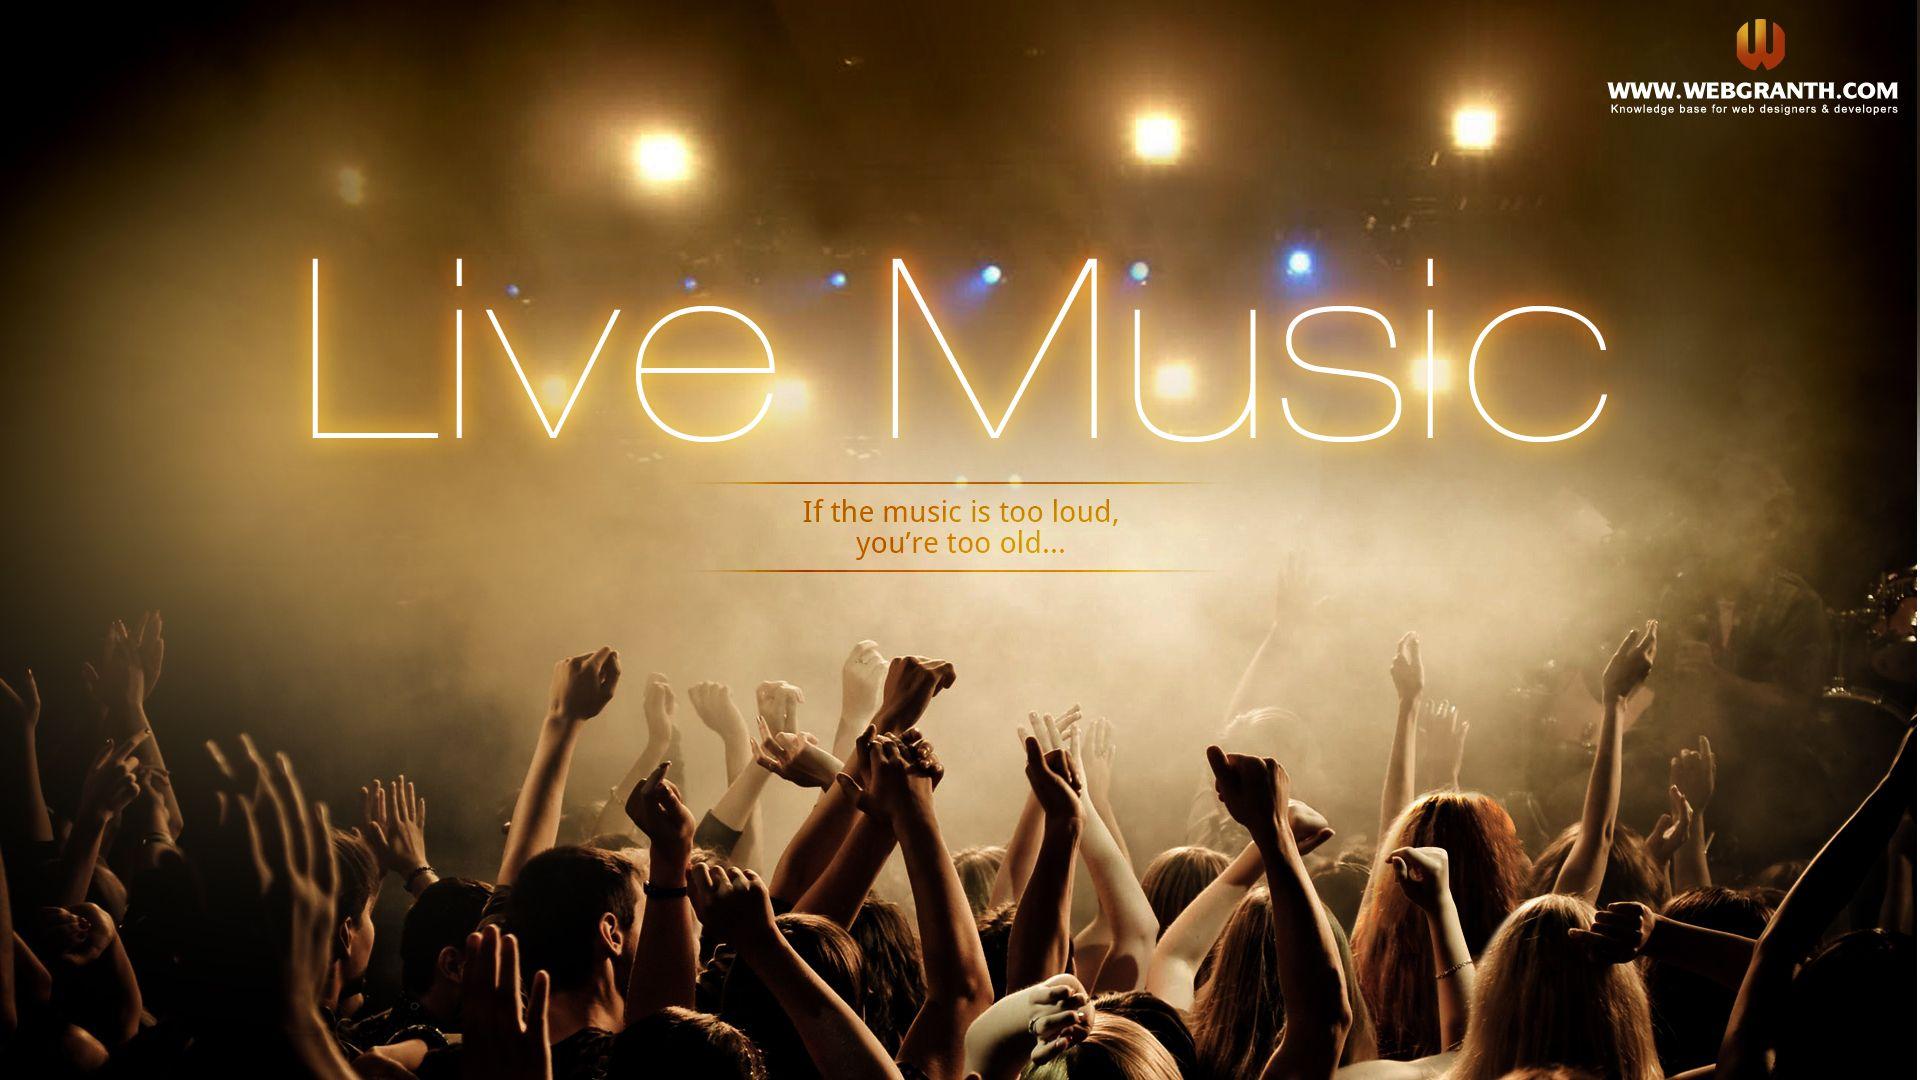 500 Live Music Pictures HD  Download Free Images on Unsplash